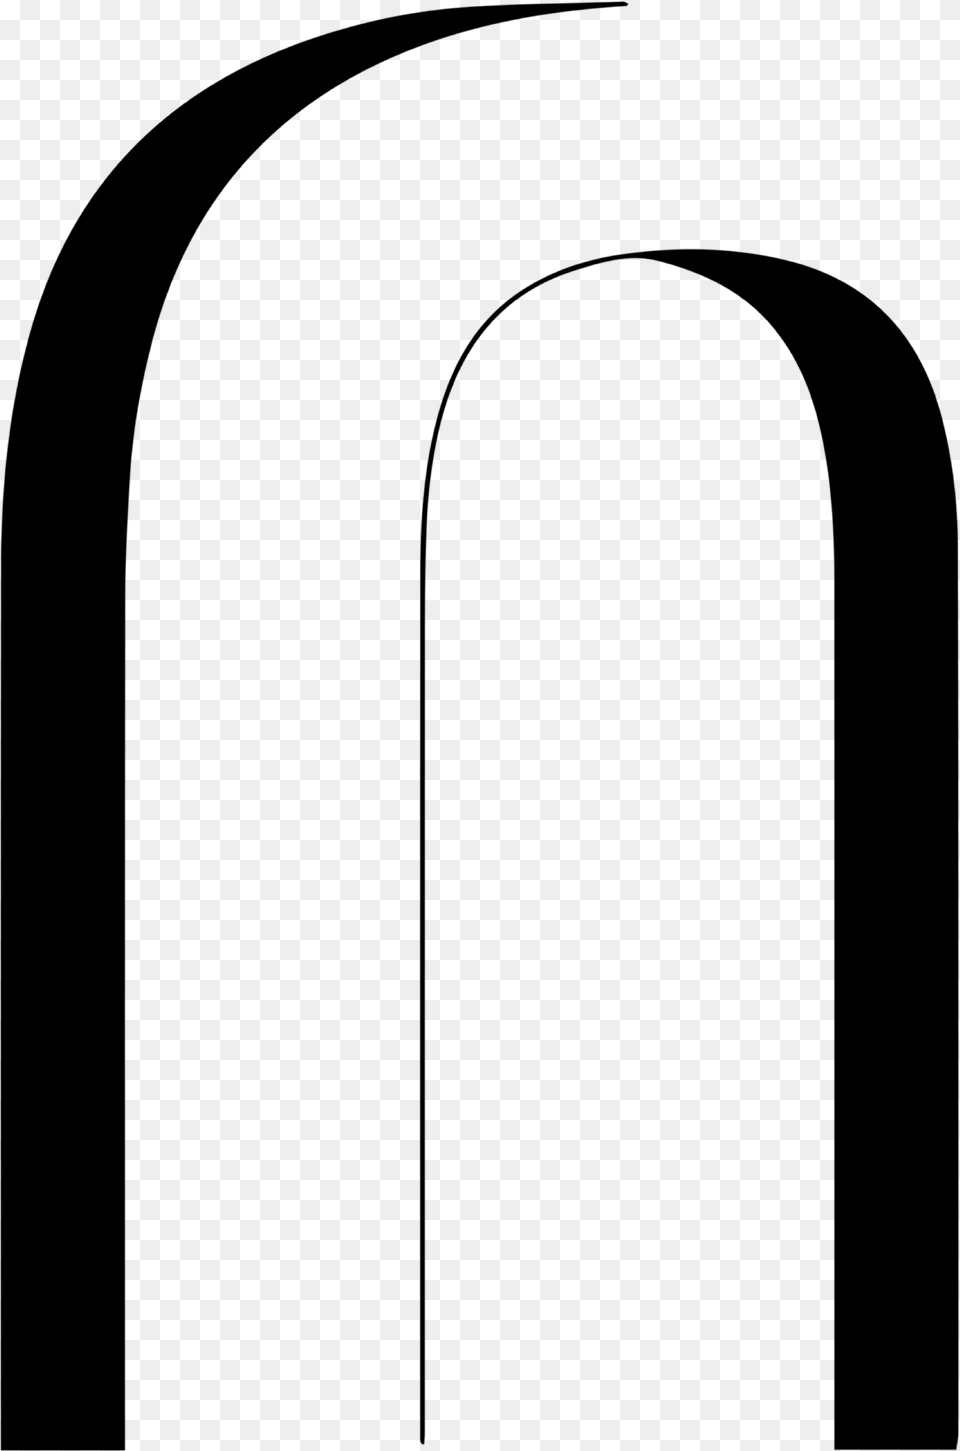 Shape Shapes Black Bend Arch Curve Freetoedit Arch, Gray Png